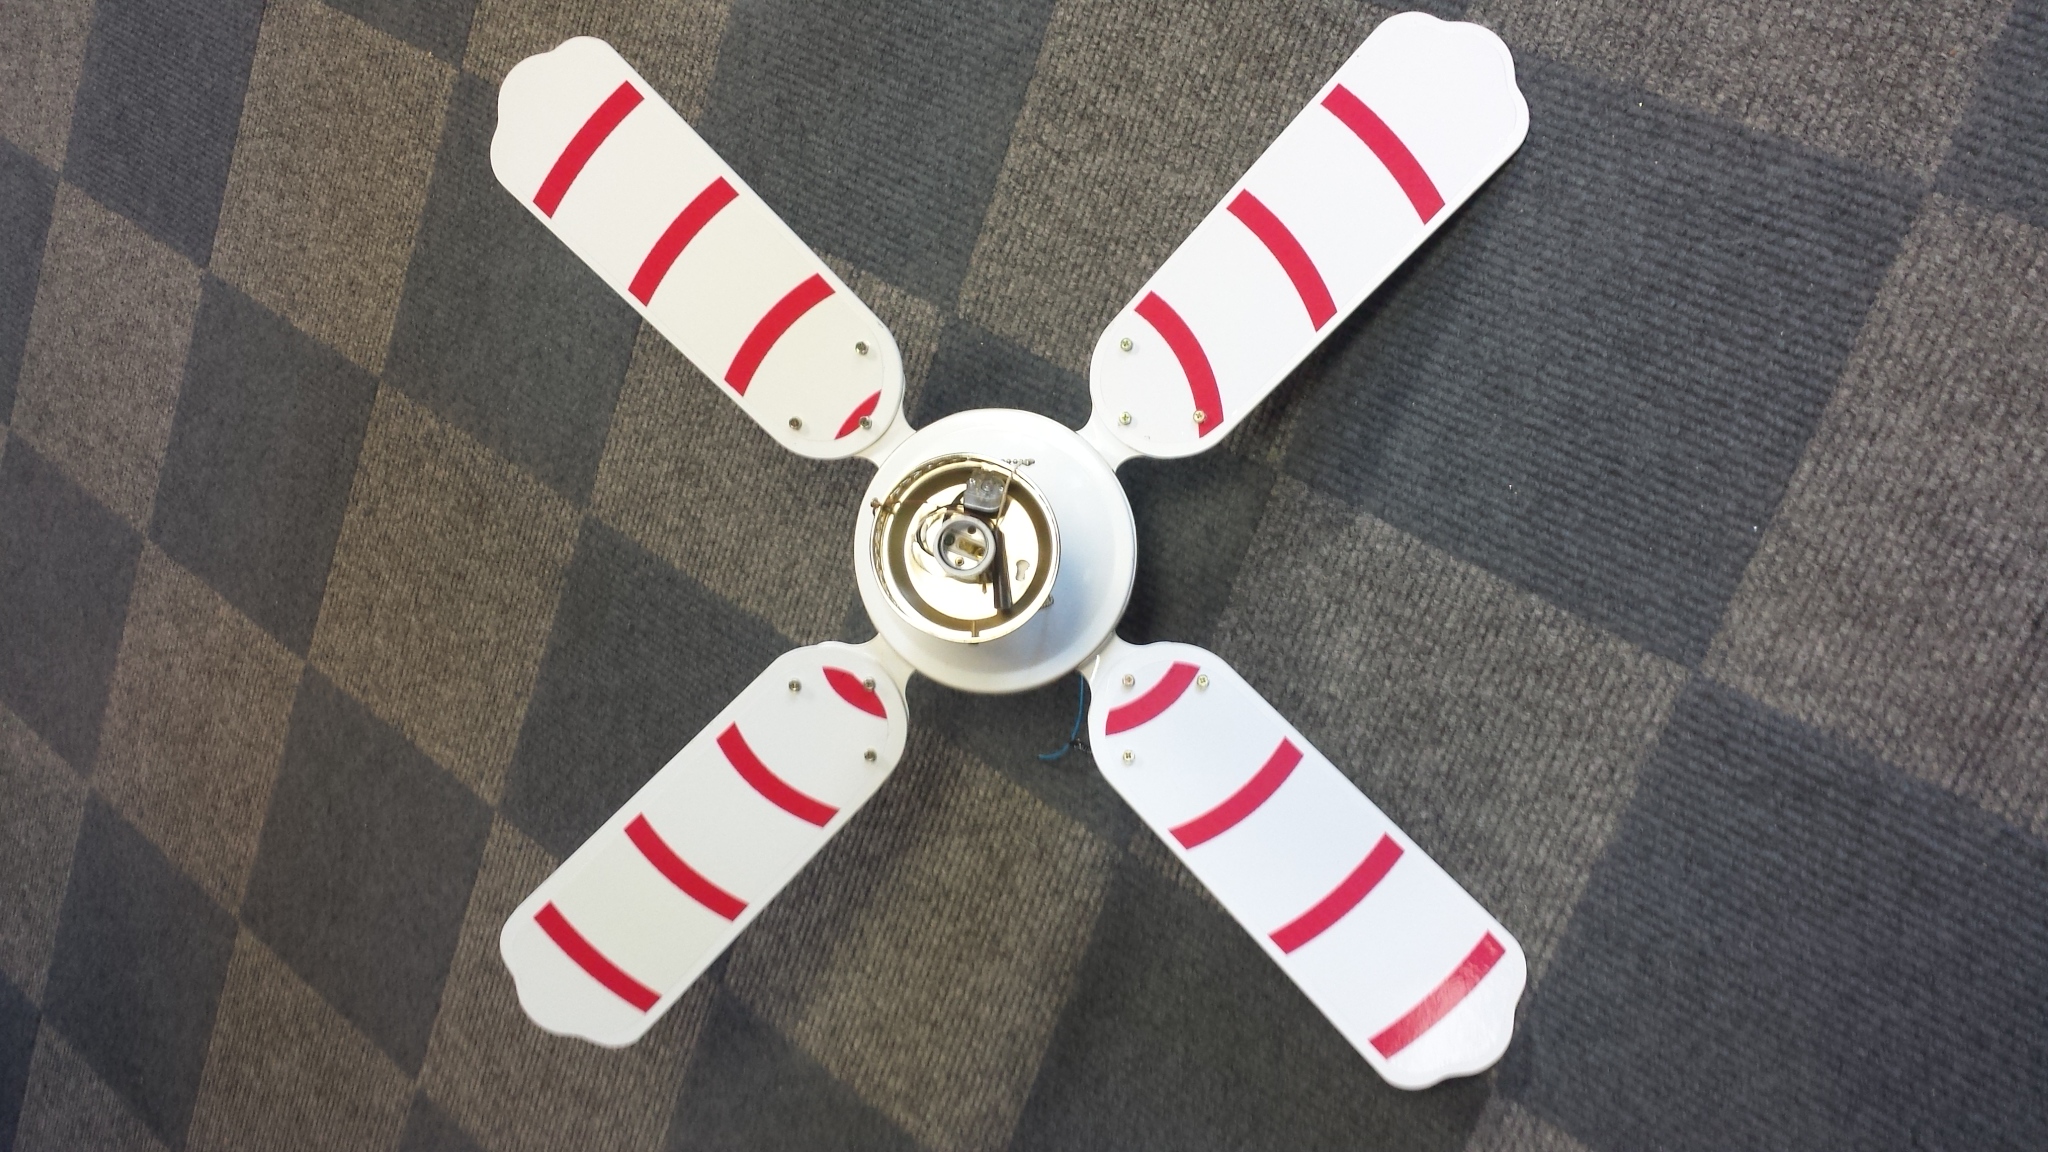 fan paddles made with sublimation printing